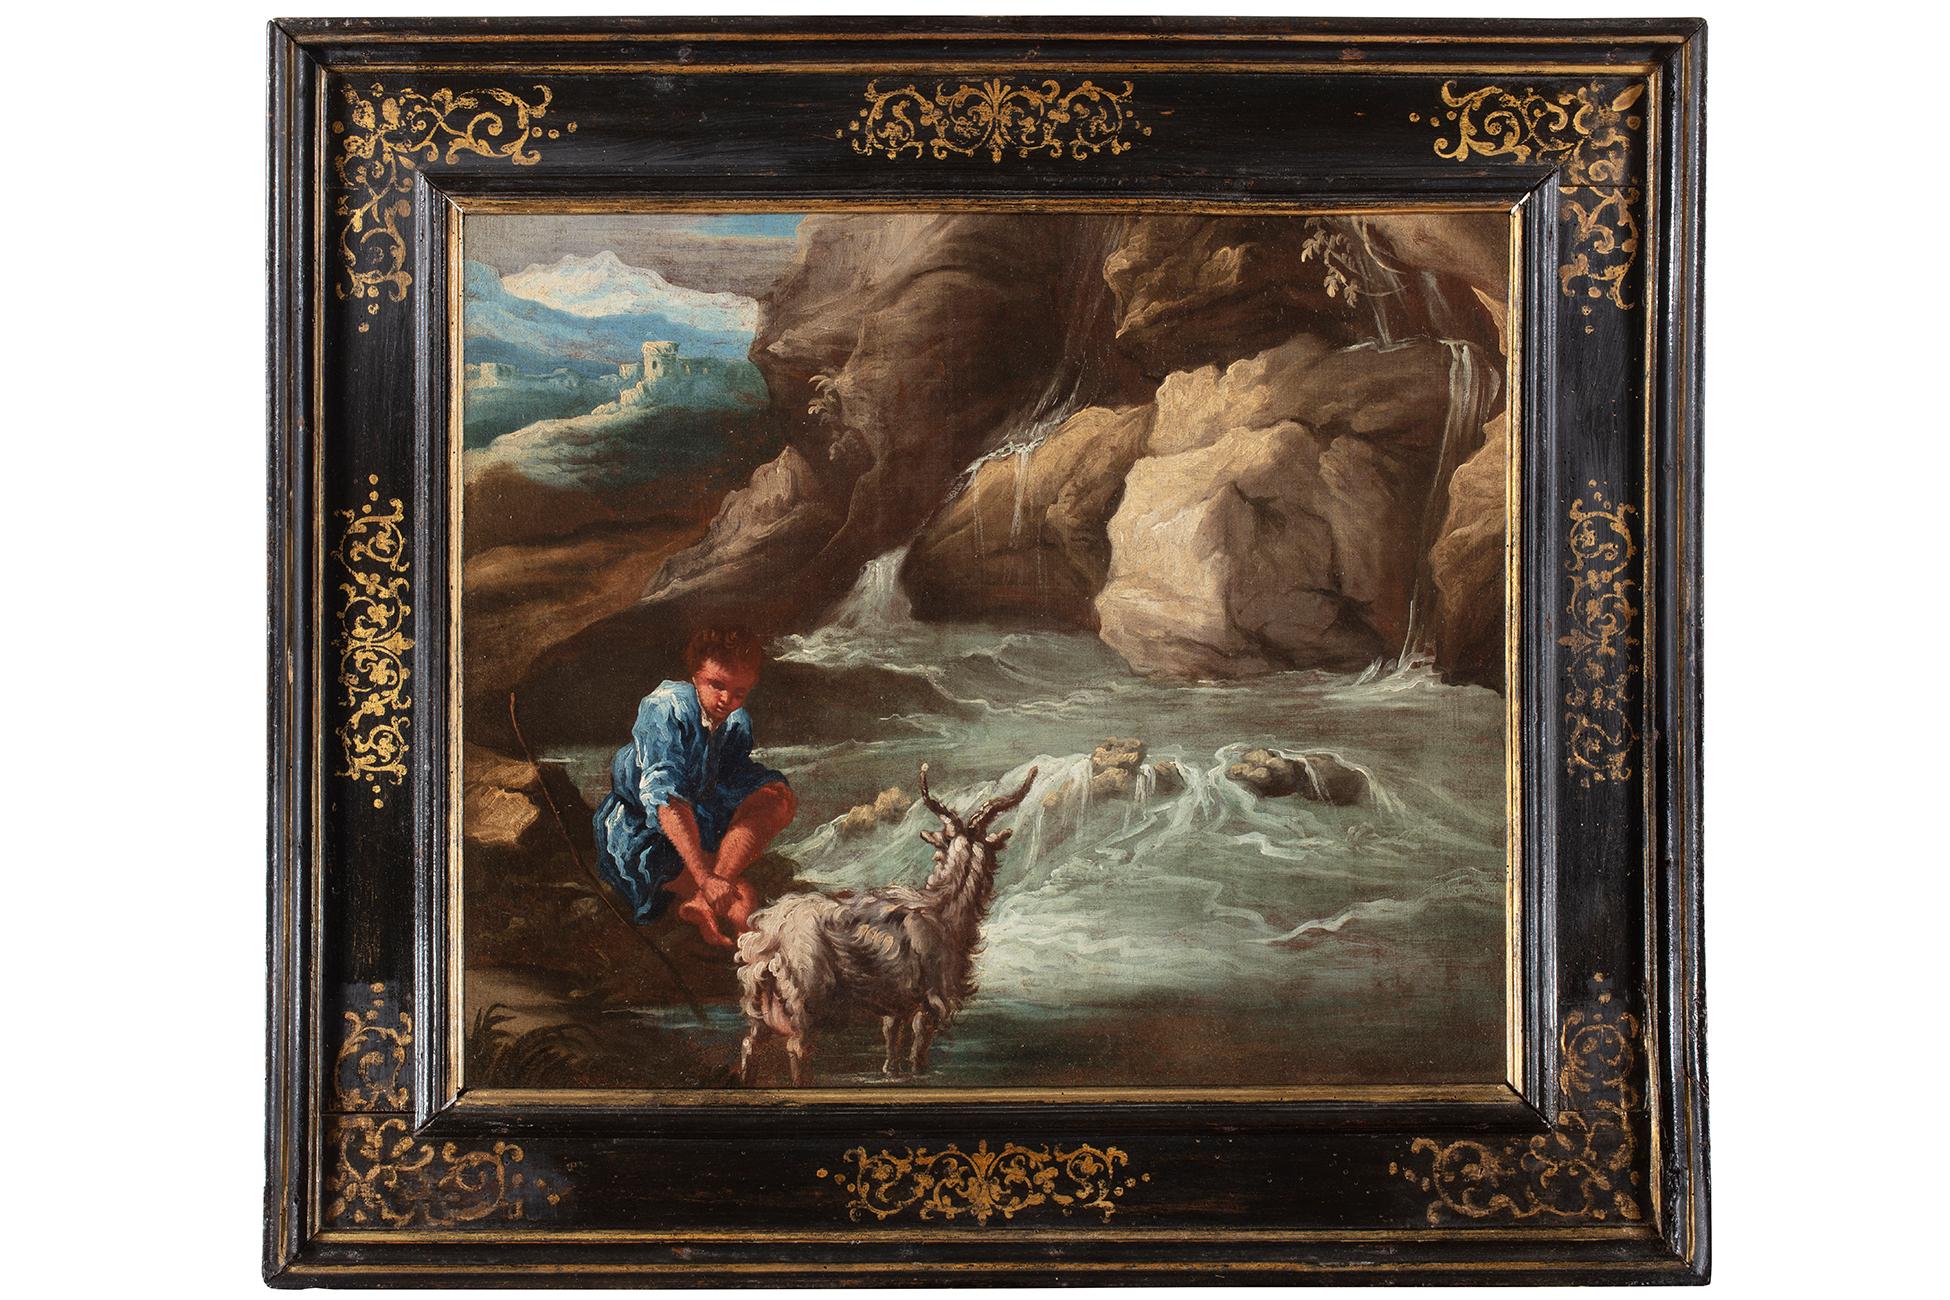 Giuseppe Antonio Pianca Landscape Painting - 18th Century by Giuseppe Pianca Shepherd with Goat and River Oil on Canvas